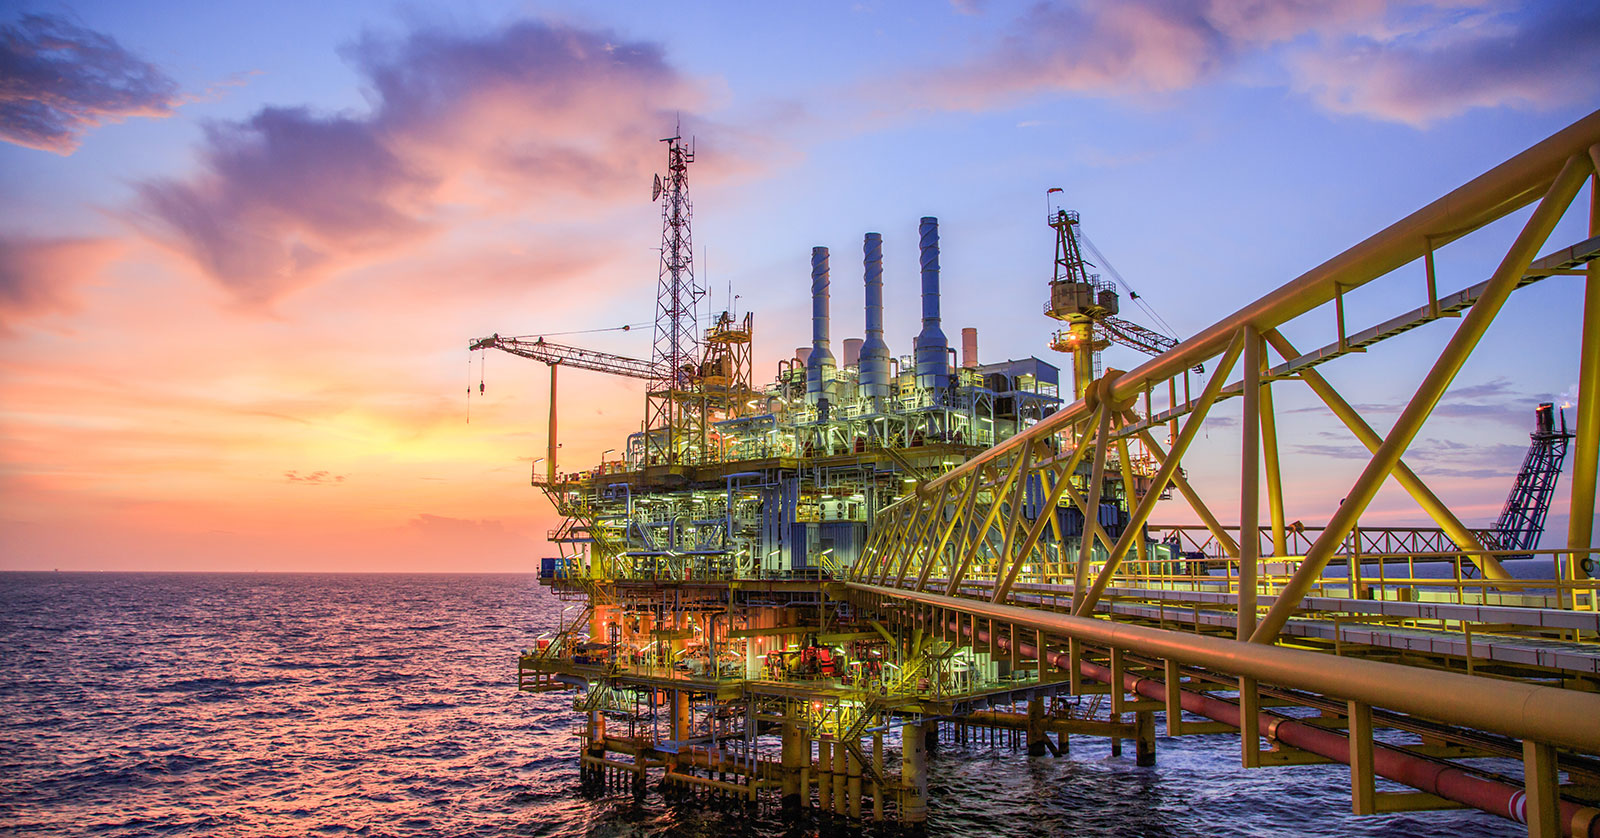 A production platform so far has no offshore oil rig accidents.